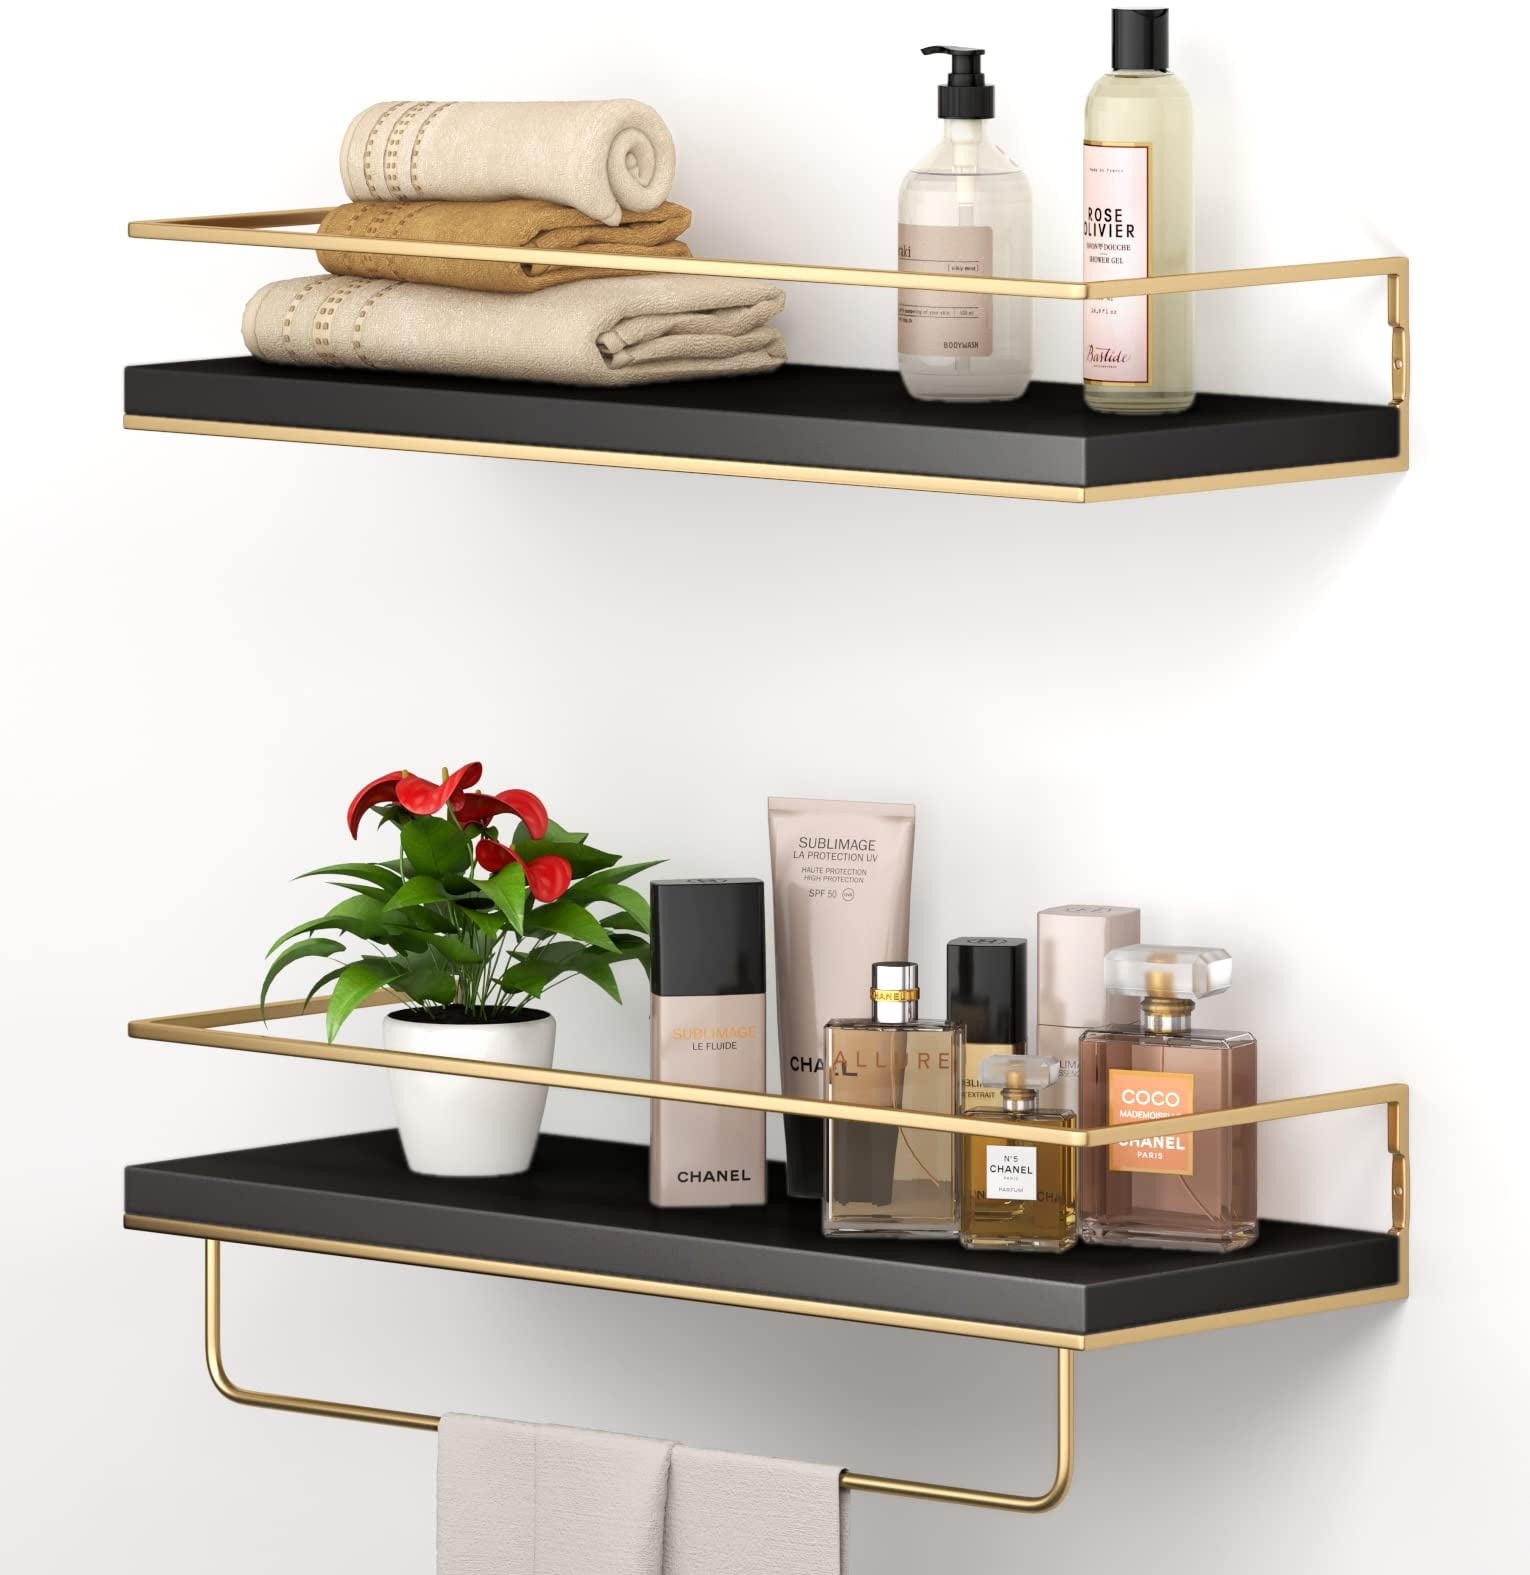 Shario - Set of 2 Floating Shelves with Gold Towel Rail Wall Hanging, Decorative Storage Shelves for Bathroom, Kitchen, Living Room and Bedroom